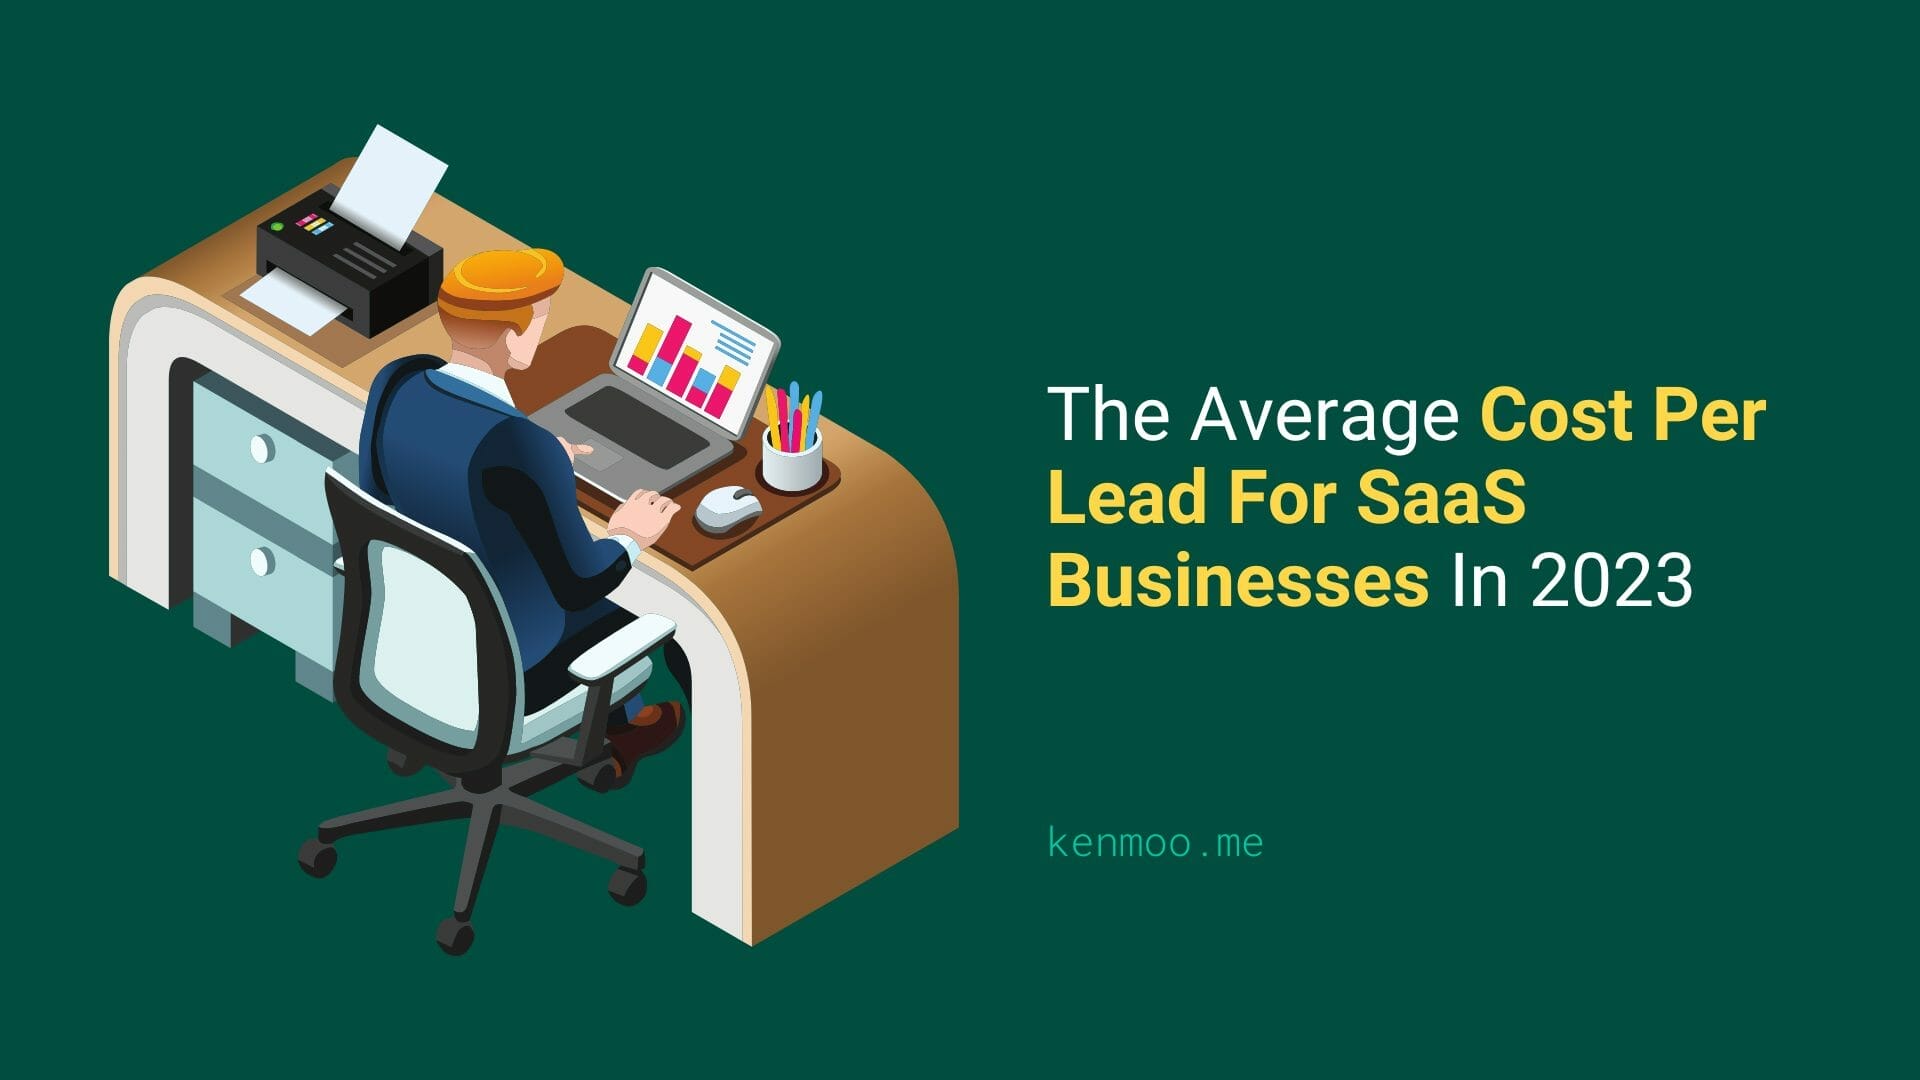 The Average Cost Per Lead For SaaS Businesses In 2023